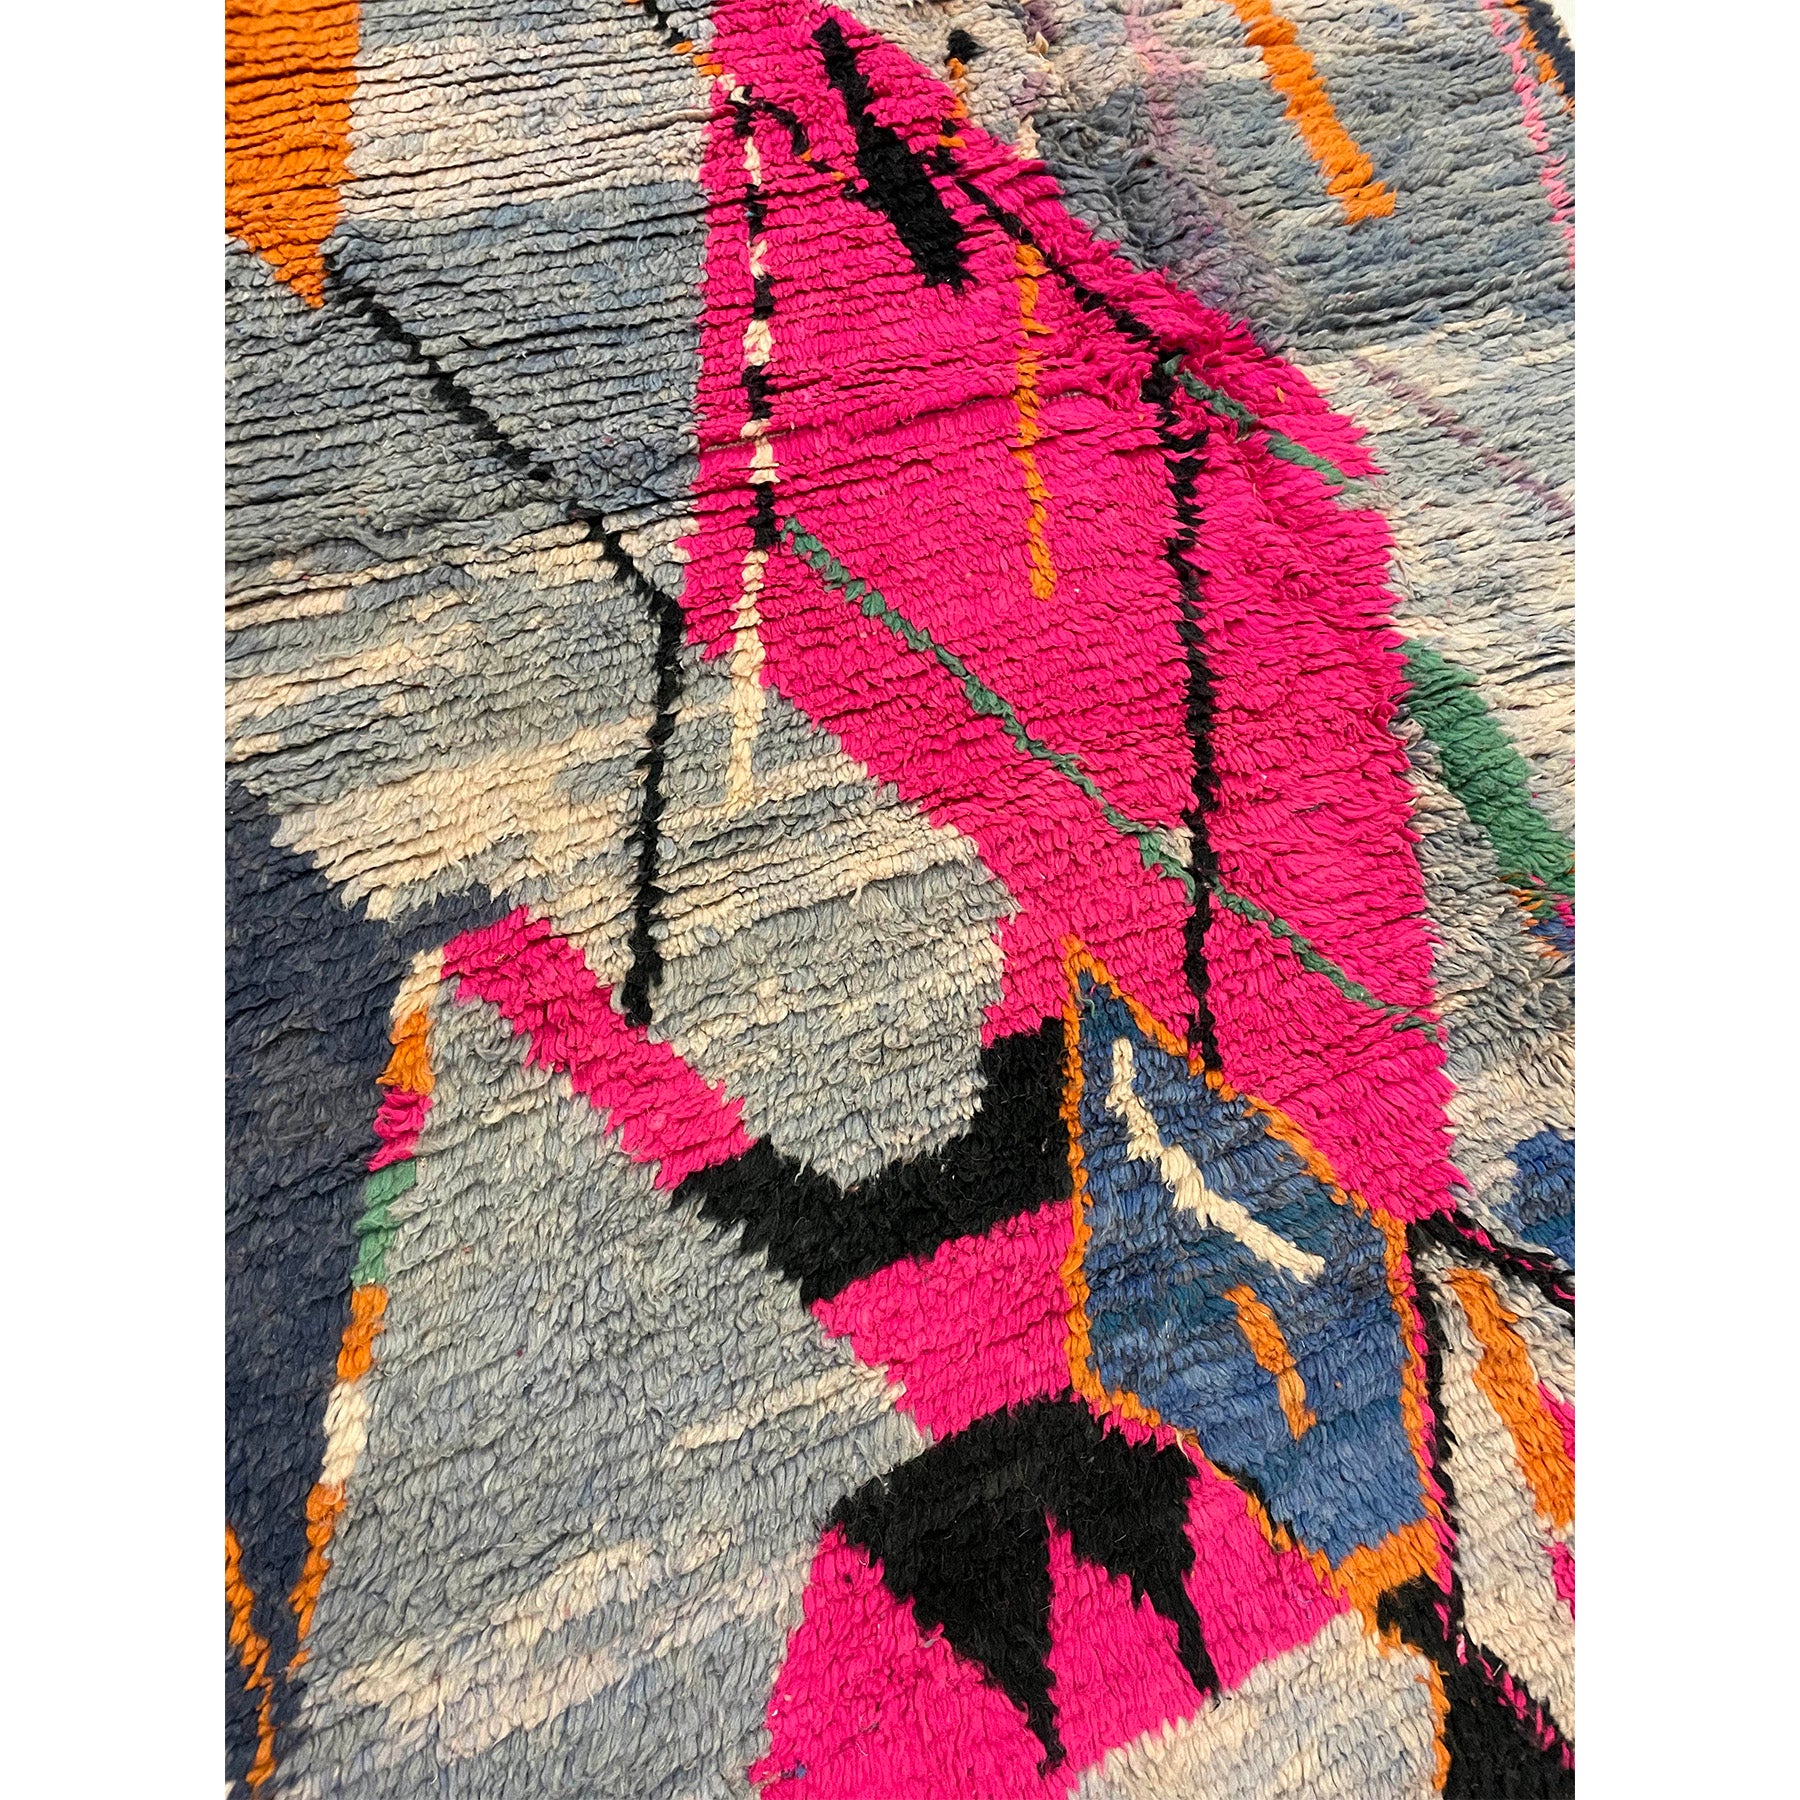 Handknotted Moroccan diamond rug with colorful details - Kantara | Moroccan Rugs